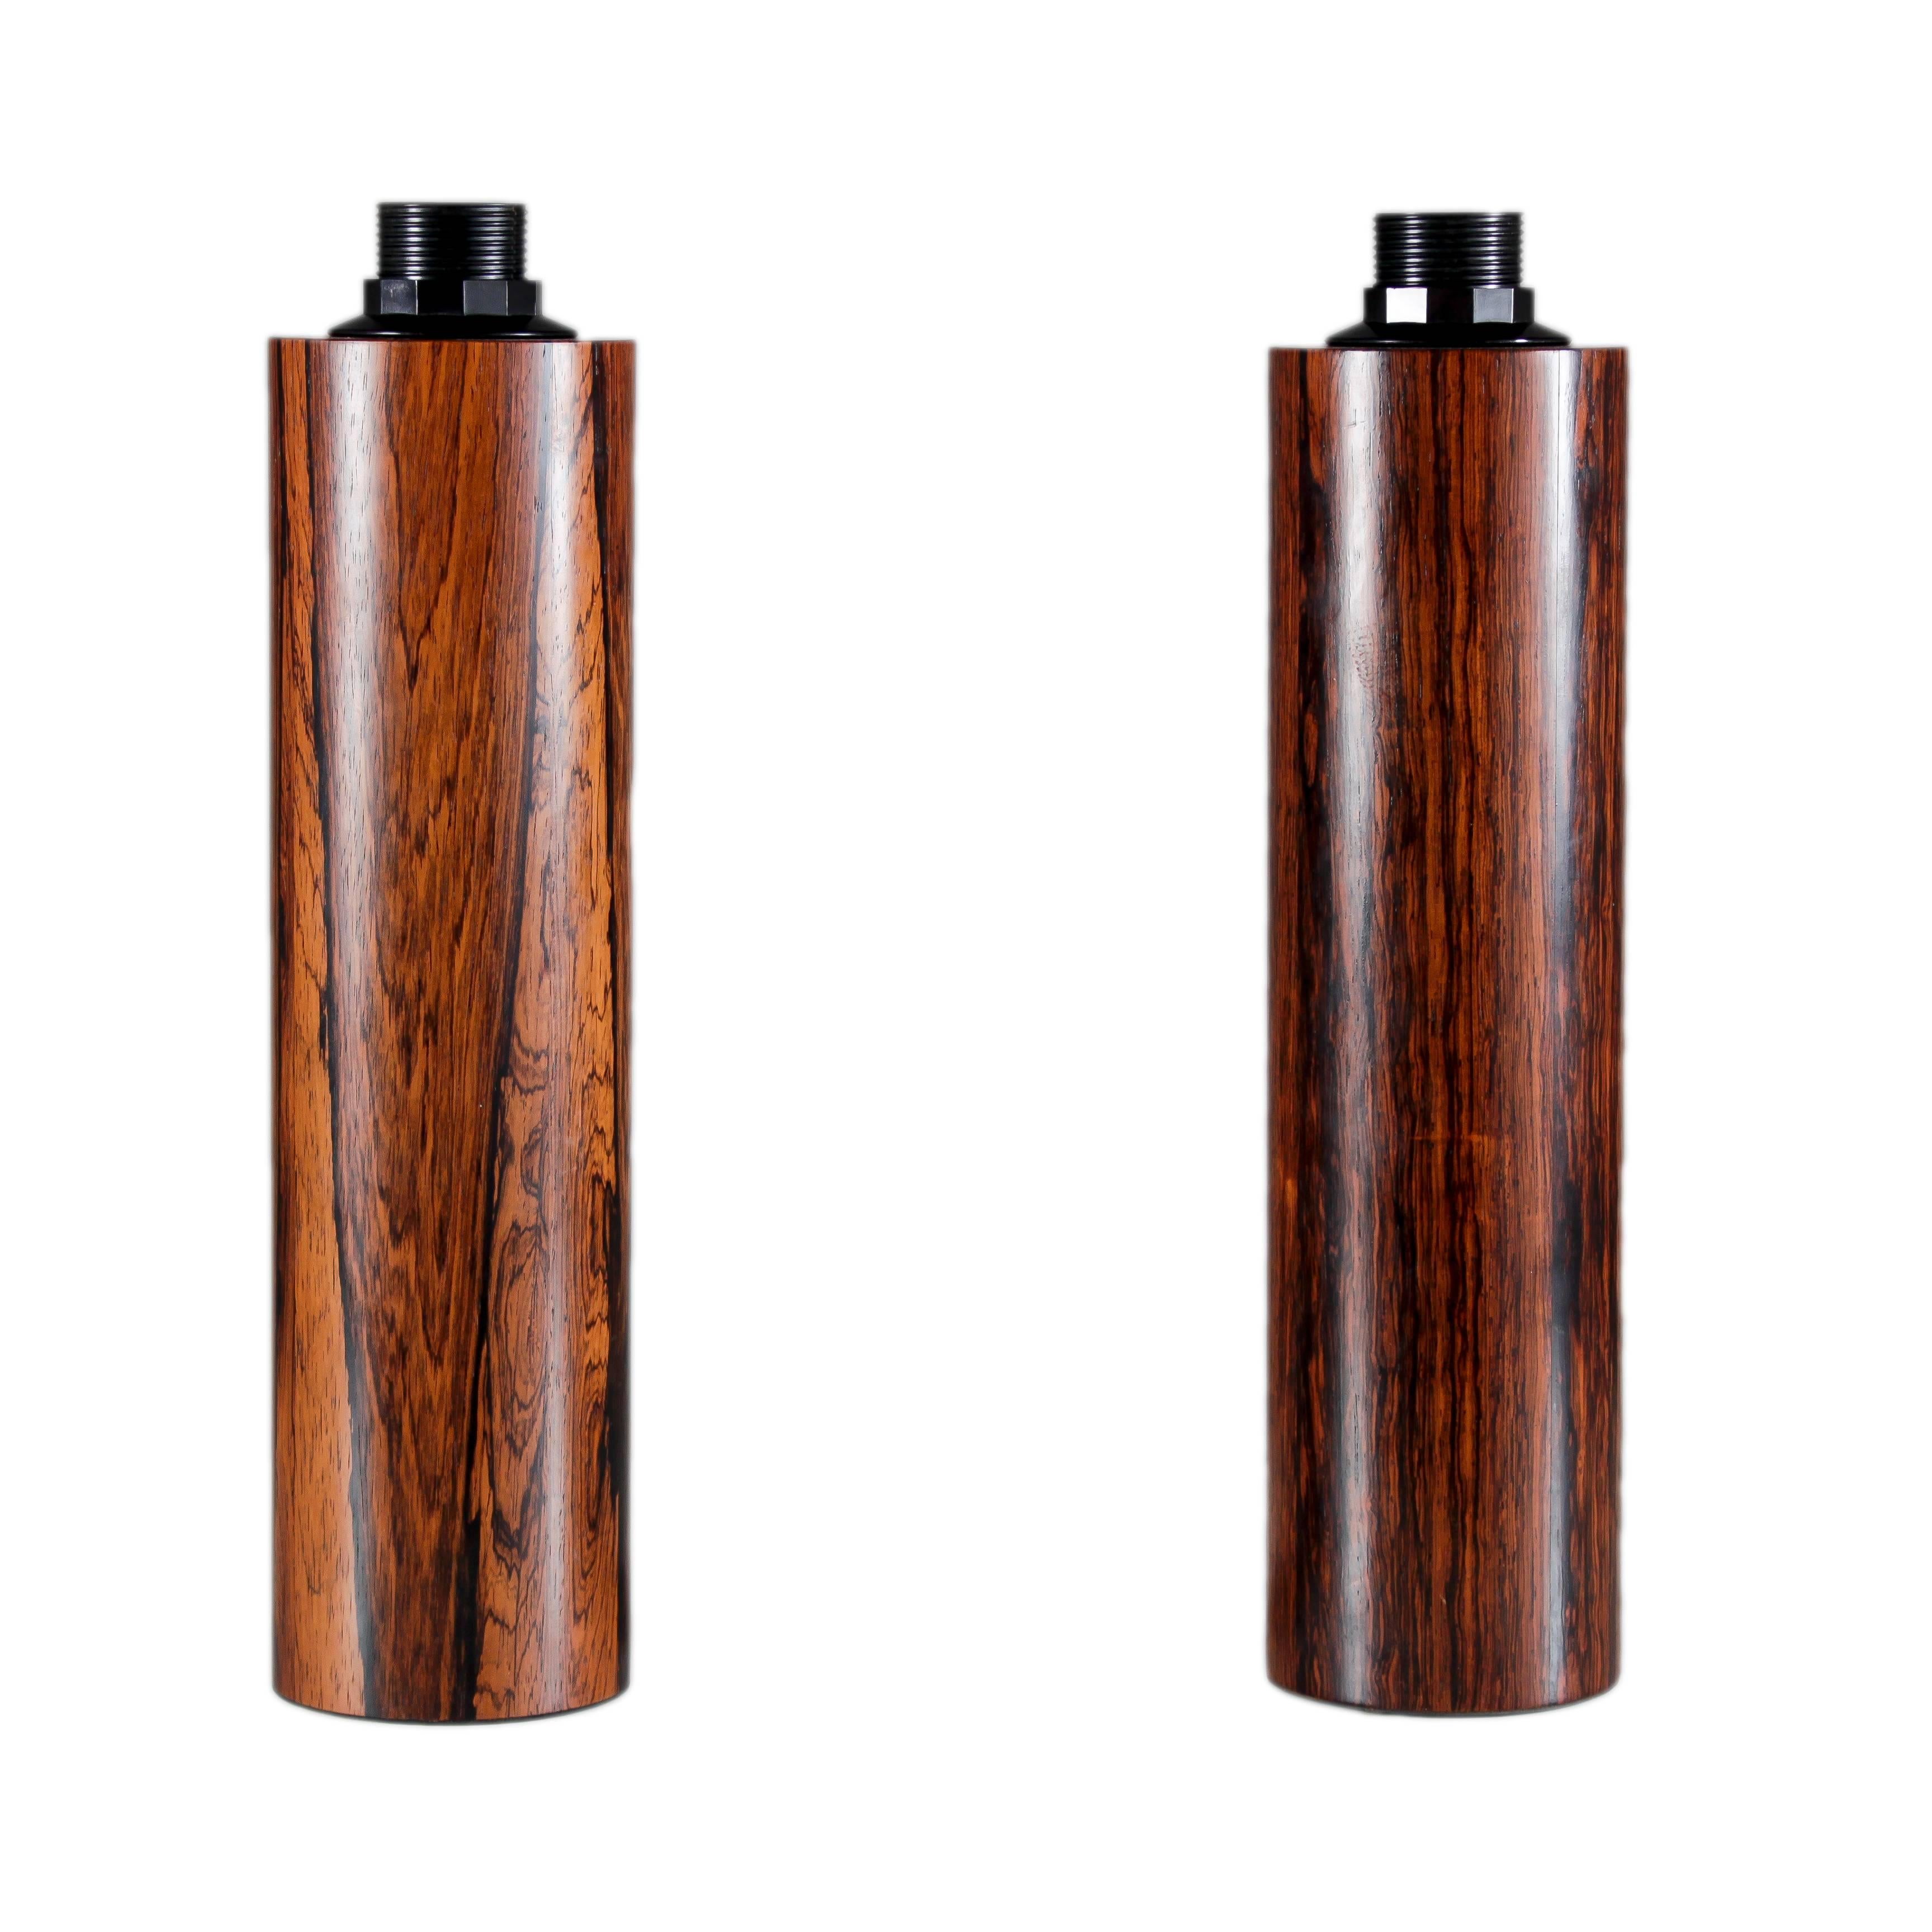 Set of two cylinder-shaped table lamps by Luxus, Sweden. The lamps are in excellent vintage condition and the wood looks vibrant.
Measurements include the socket.
The lamps will come with any type of wiring you desire.
Worldwide free shipping.